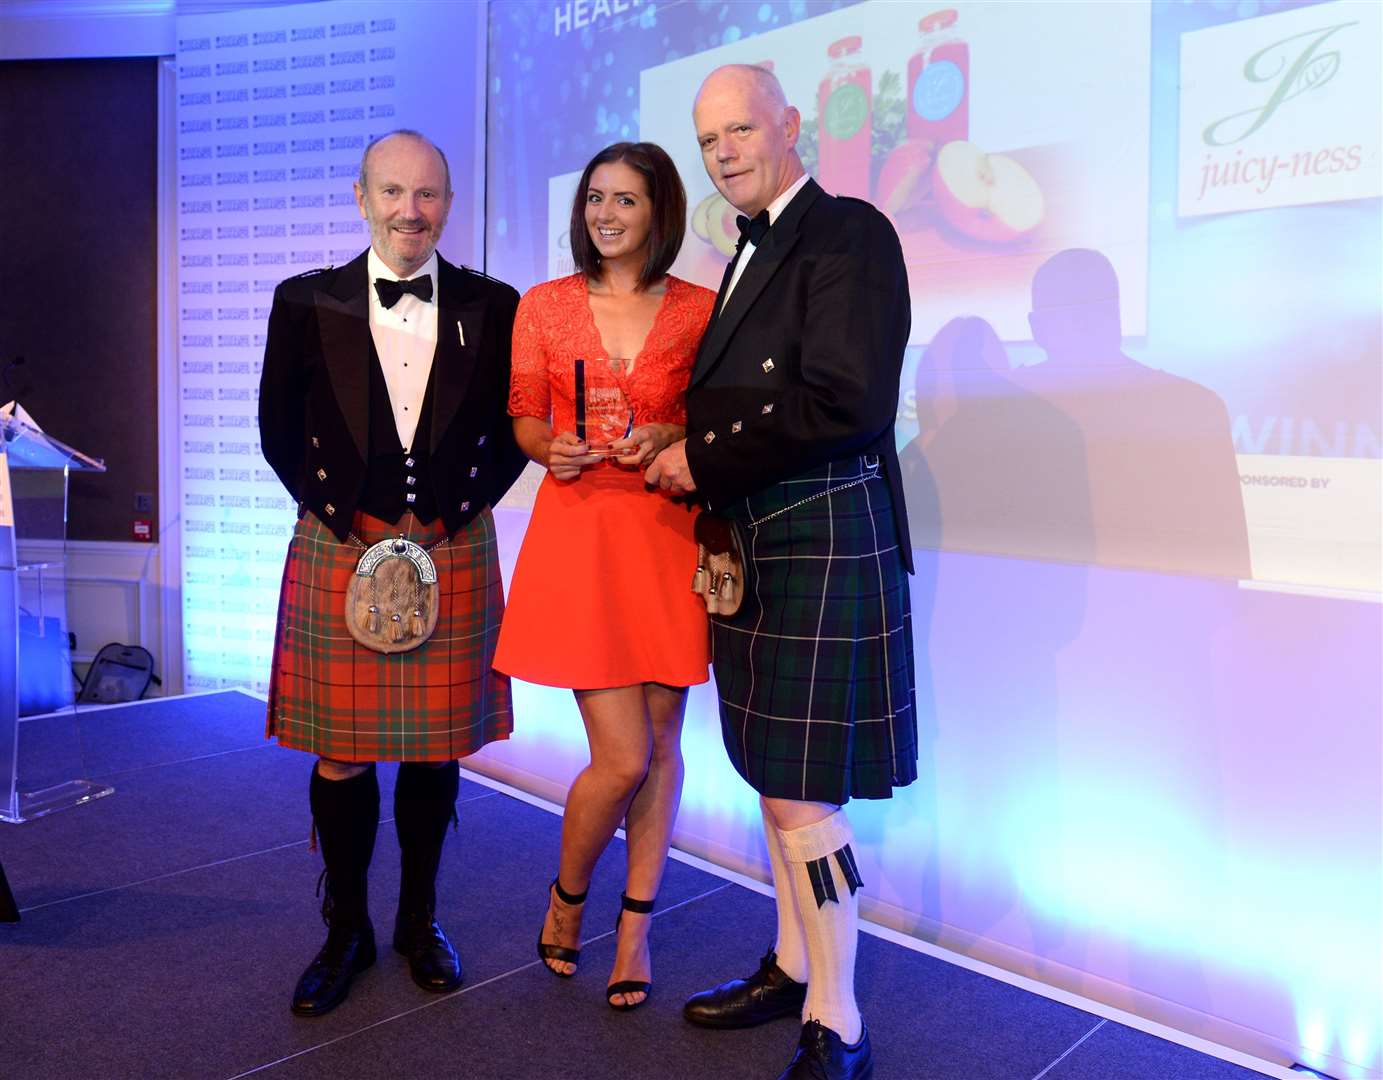 Alison receiving the healthier food and drink award at the Highlands and Islands Food Awards 2016, Kingsmills Hotel Inverness.